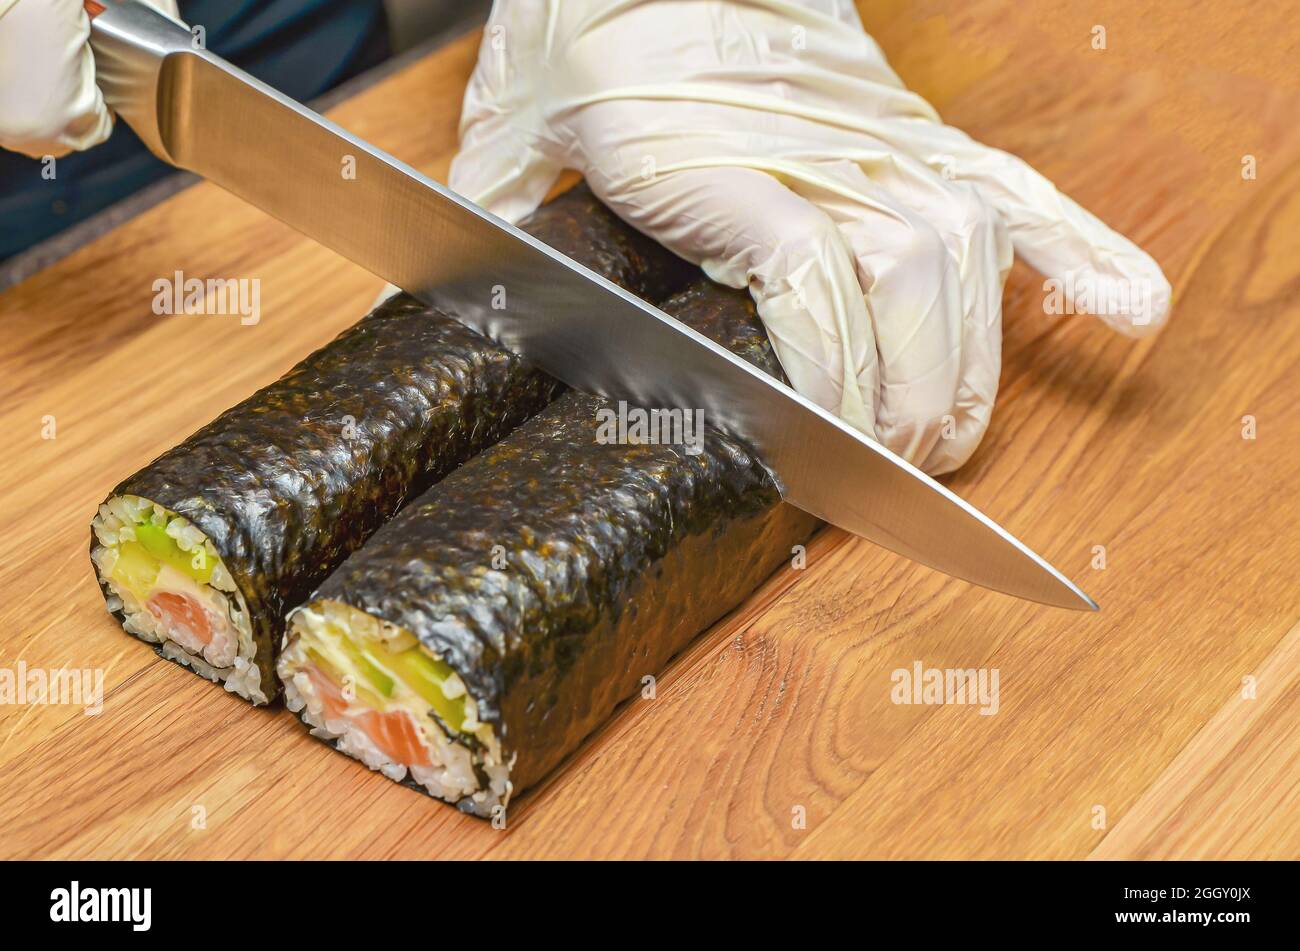 https://c8.alamy.com/comp/2GGY0JX/the-process-of-making-japanese-sushi-knife-in-hand-cuts-a-roll-close-up-on-a-wooden-board-2GGY0JX.jpg